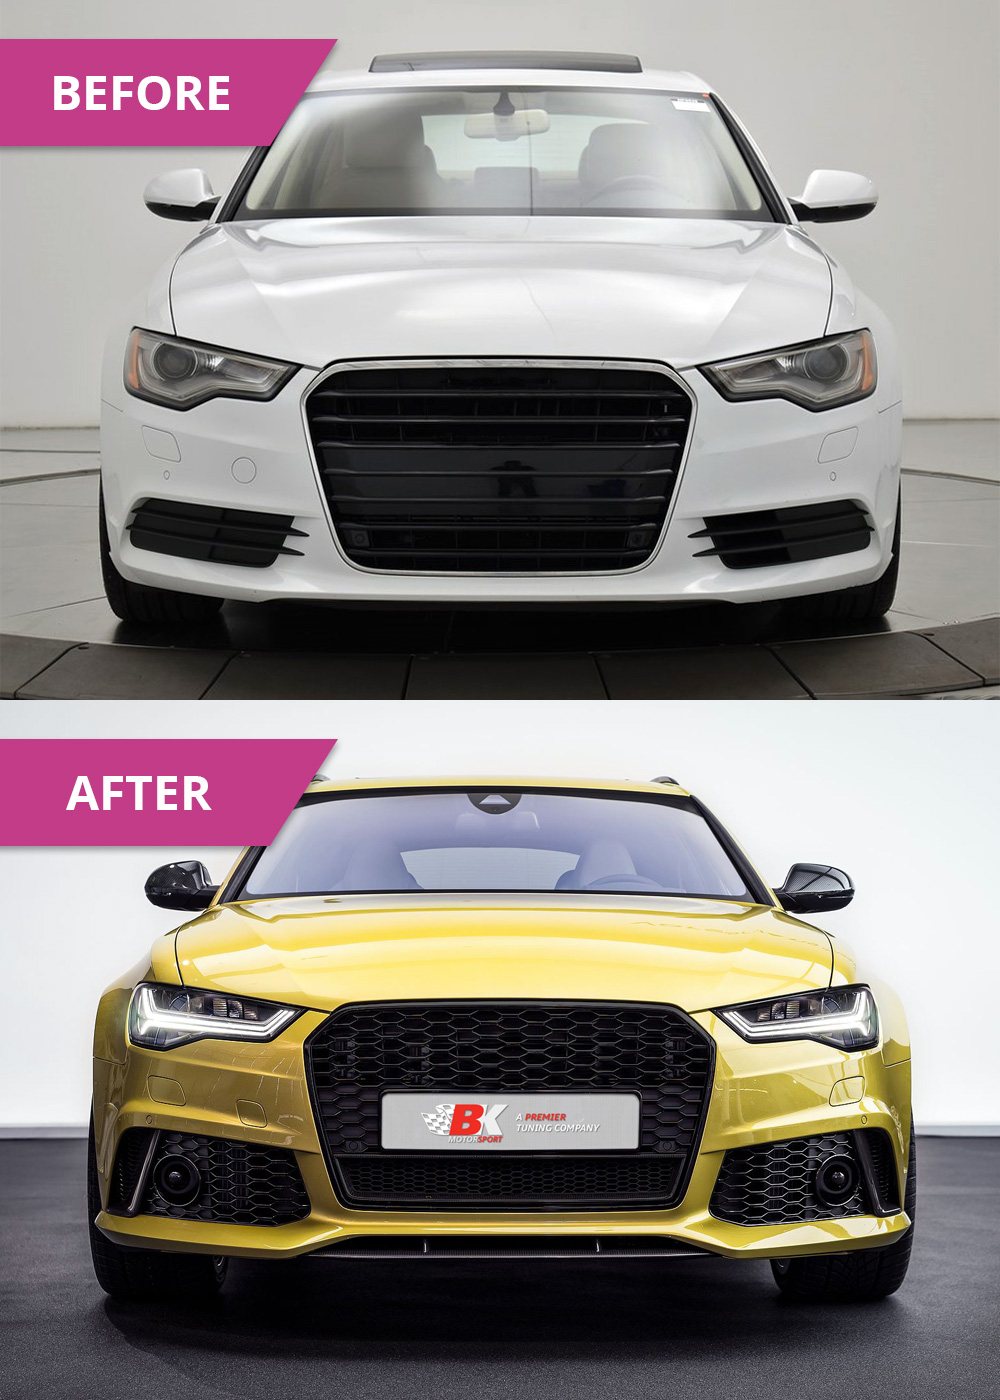 BKM Upgrade Facelift Front Bumper (RS-Style) with Full LED Headlights kit,  fits Audi A6/S6 C7.0 - BK-Motorsport